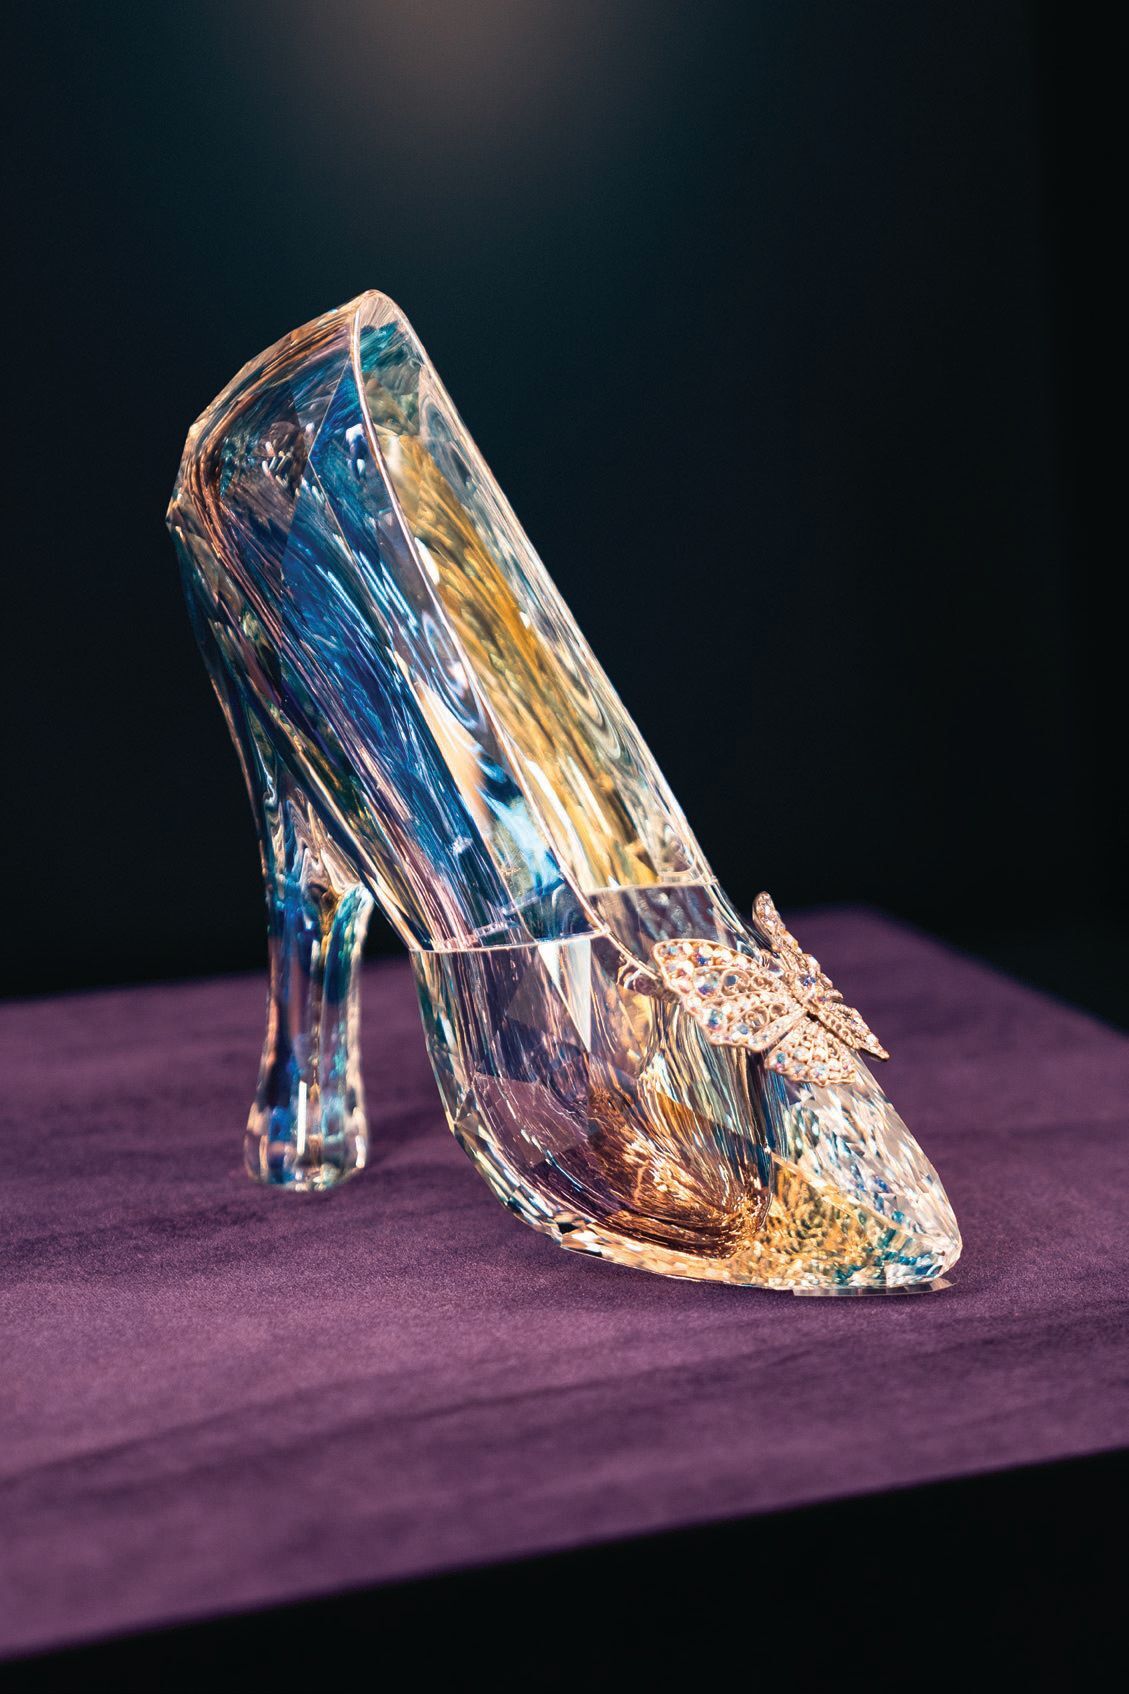 Fom the liveaction Cinderella (2015), this glass slipper is on display in the “Where Do the Stories Come From?” gallery at Disney100: The Exhibition. PHOTO © DISNEY